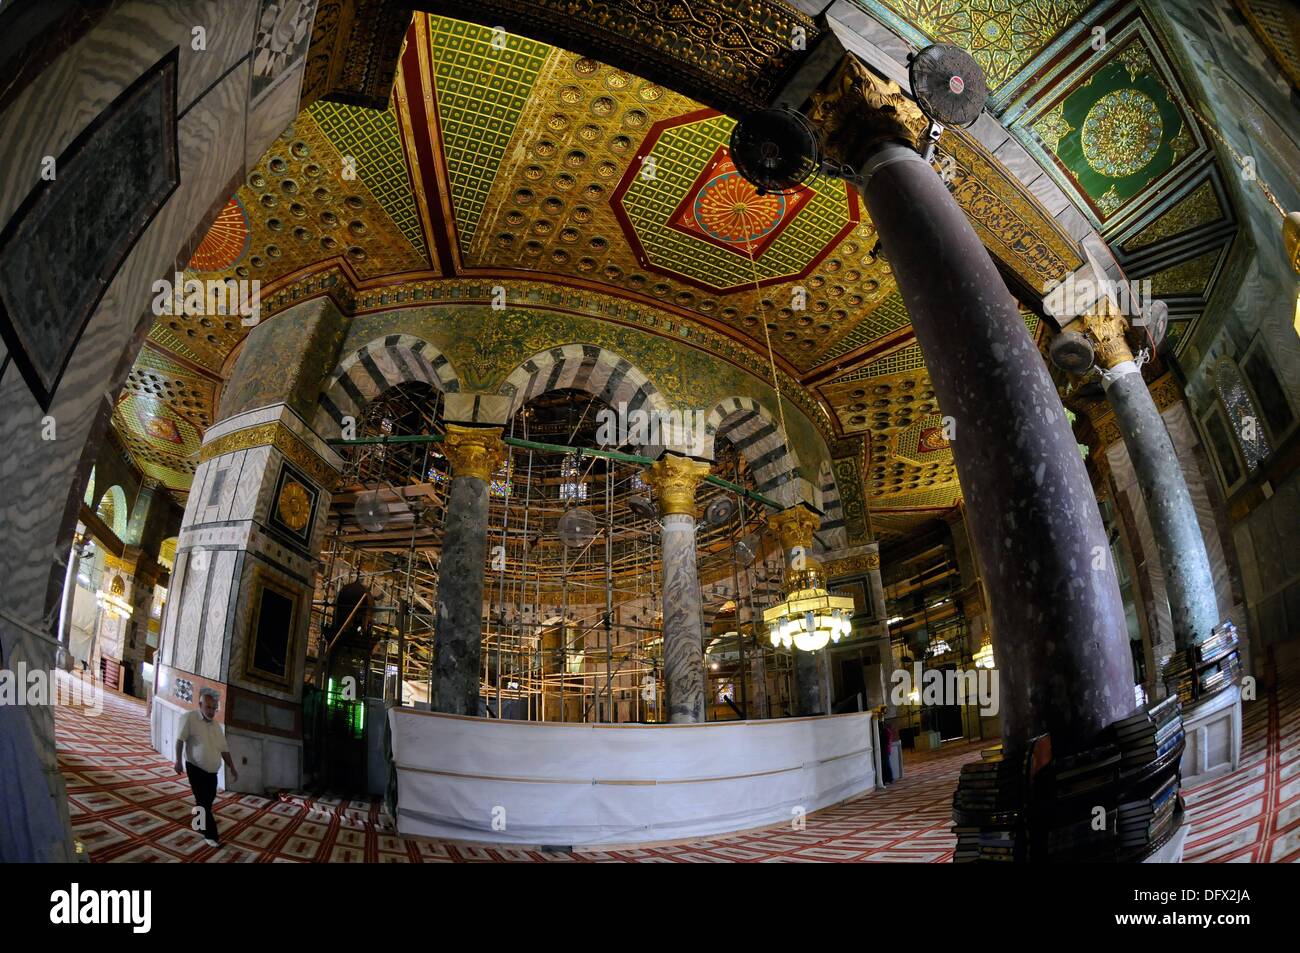 View Of The Interior Of The Dome Of The Rock On The Temple